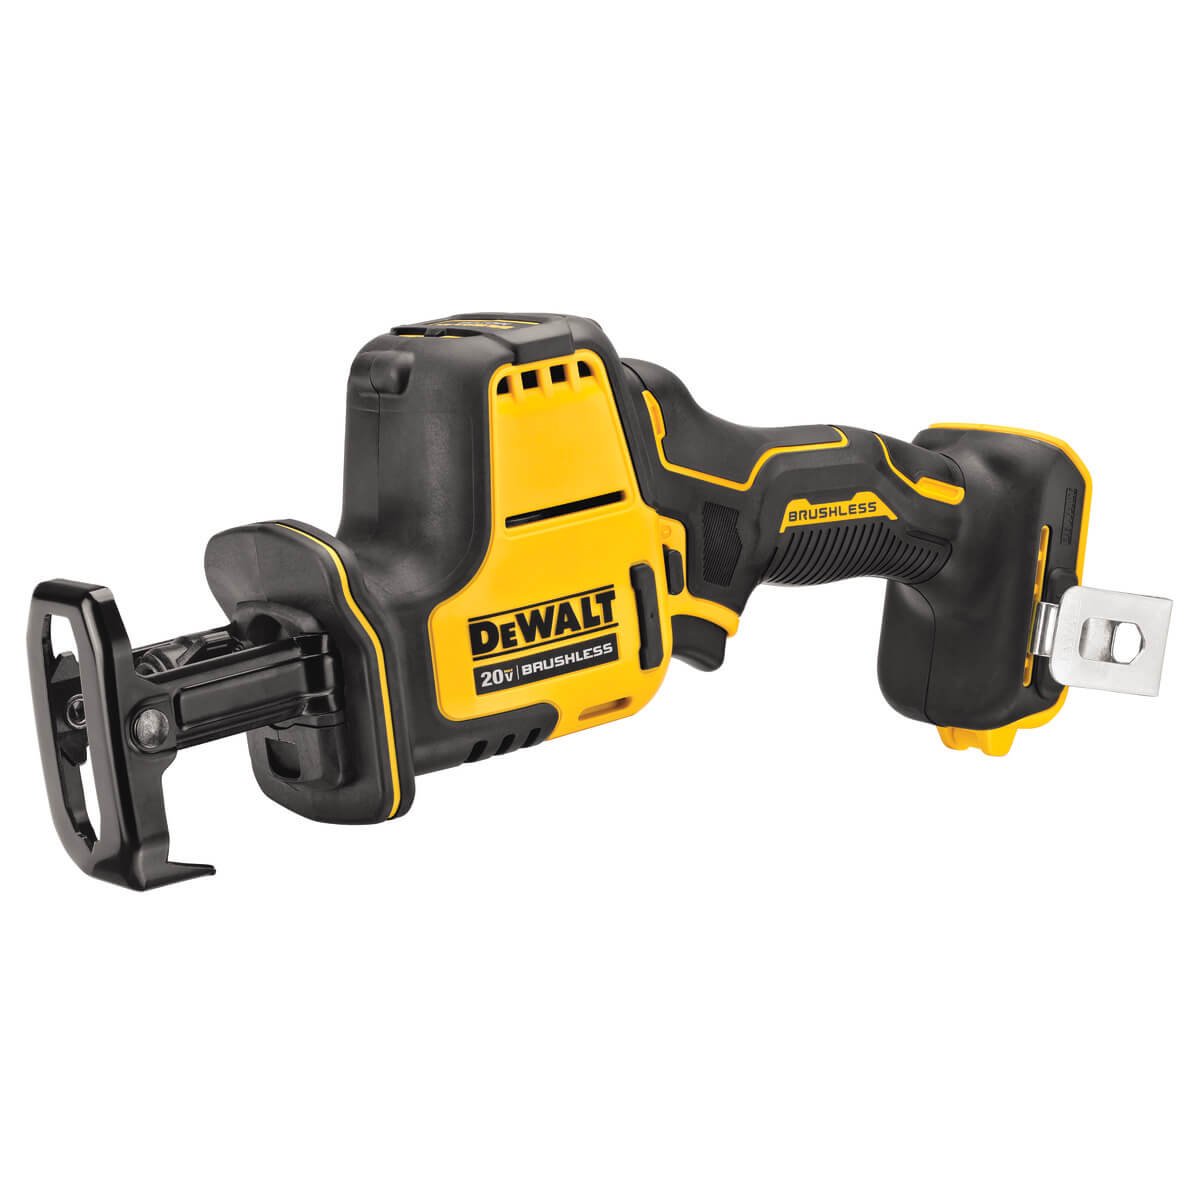 DEWALT DCS369B ATOMIC 20V MAX* CORDLESS ONE-HANDED RECIPROCATING SAW (TOOL ONLY) - wise-line-tools